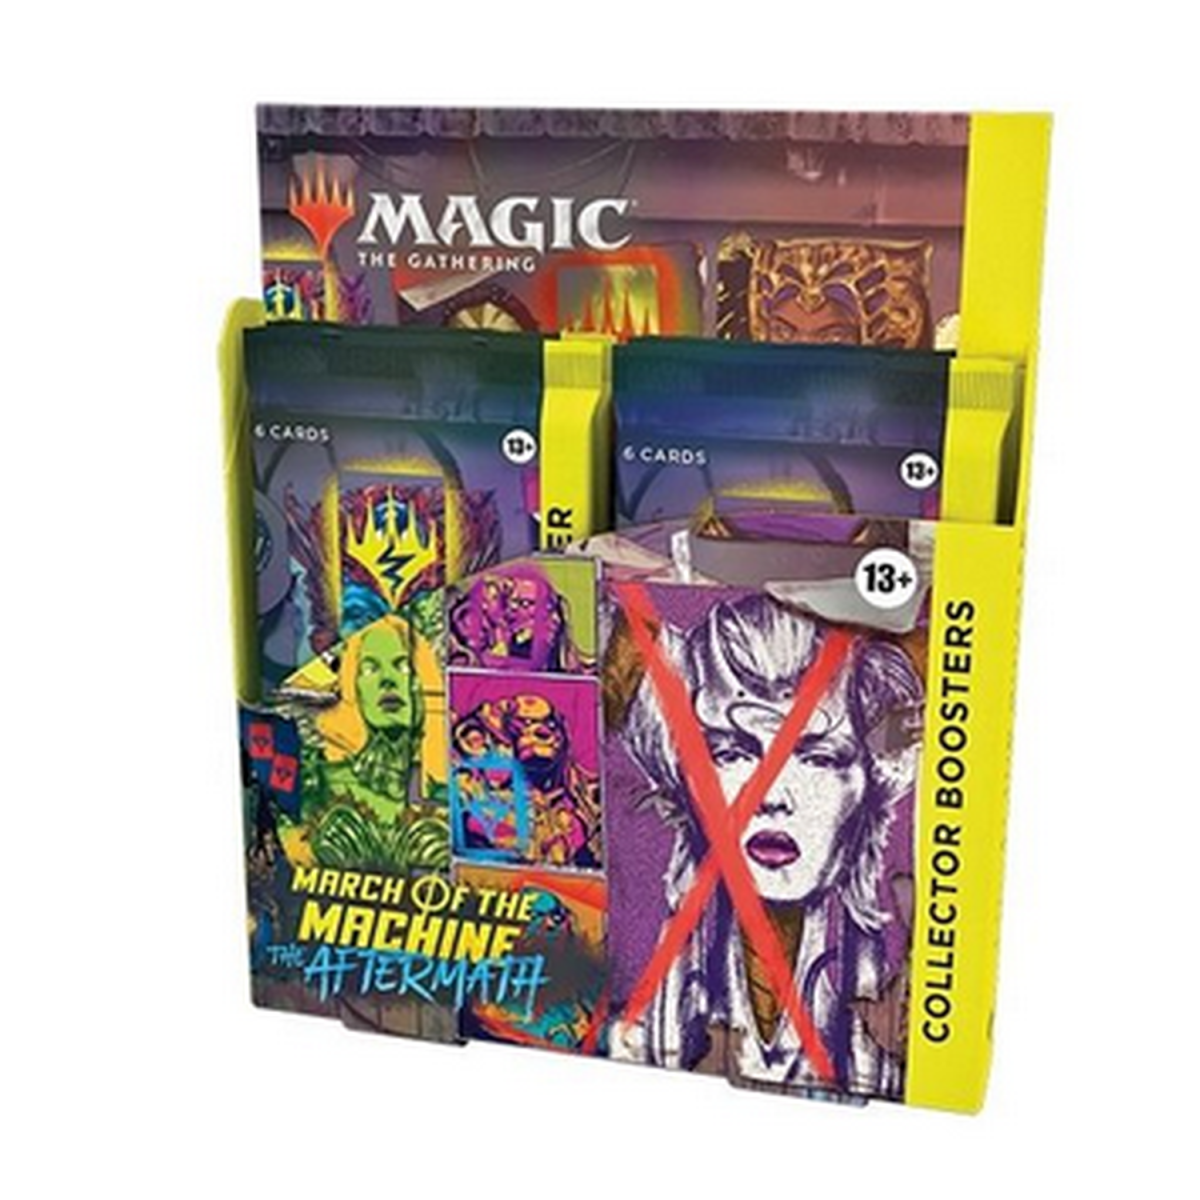 Magic The Gathering - Booster Box - Collector - Invasion of the Machines: The Day After Tomorrow - EN